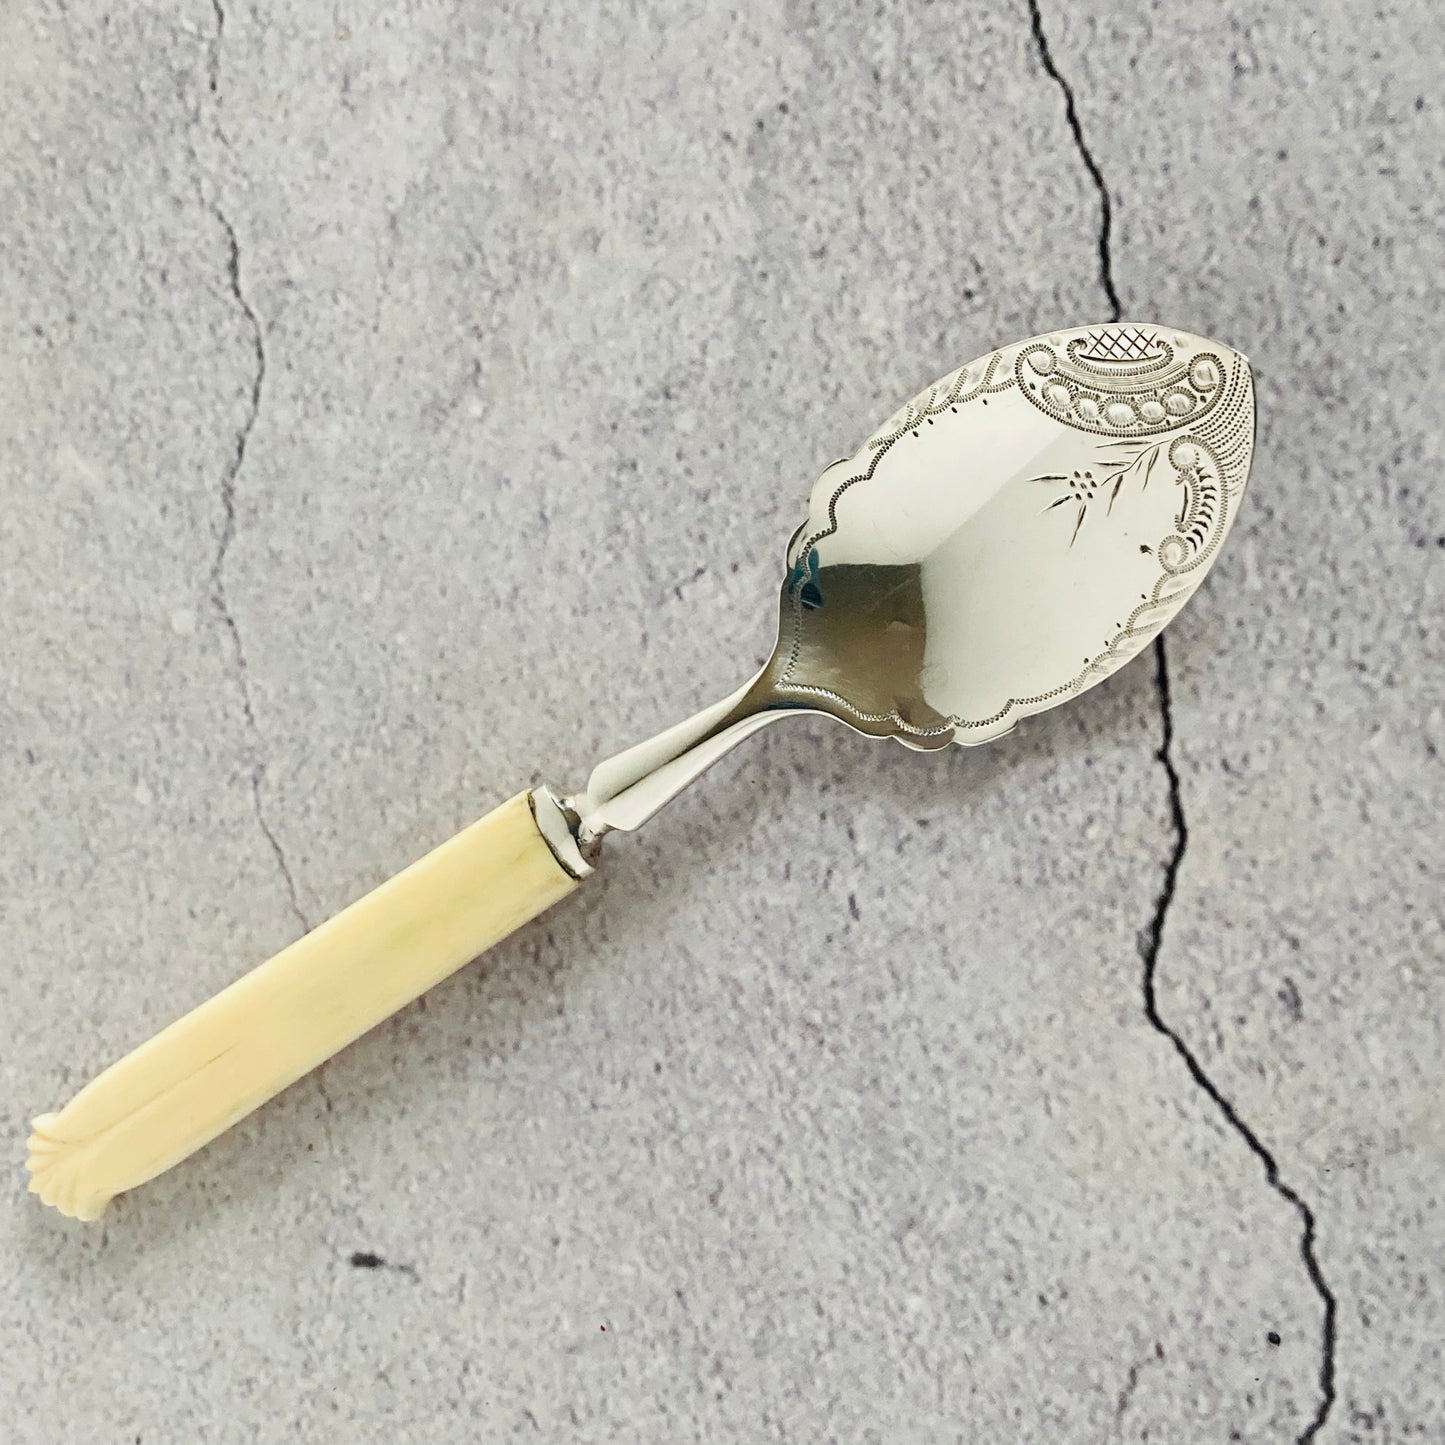 The Headhunter Jodie - Antique Sterling Silver and Bone Preserve Spoon